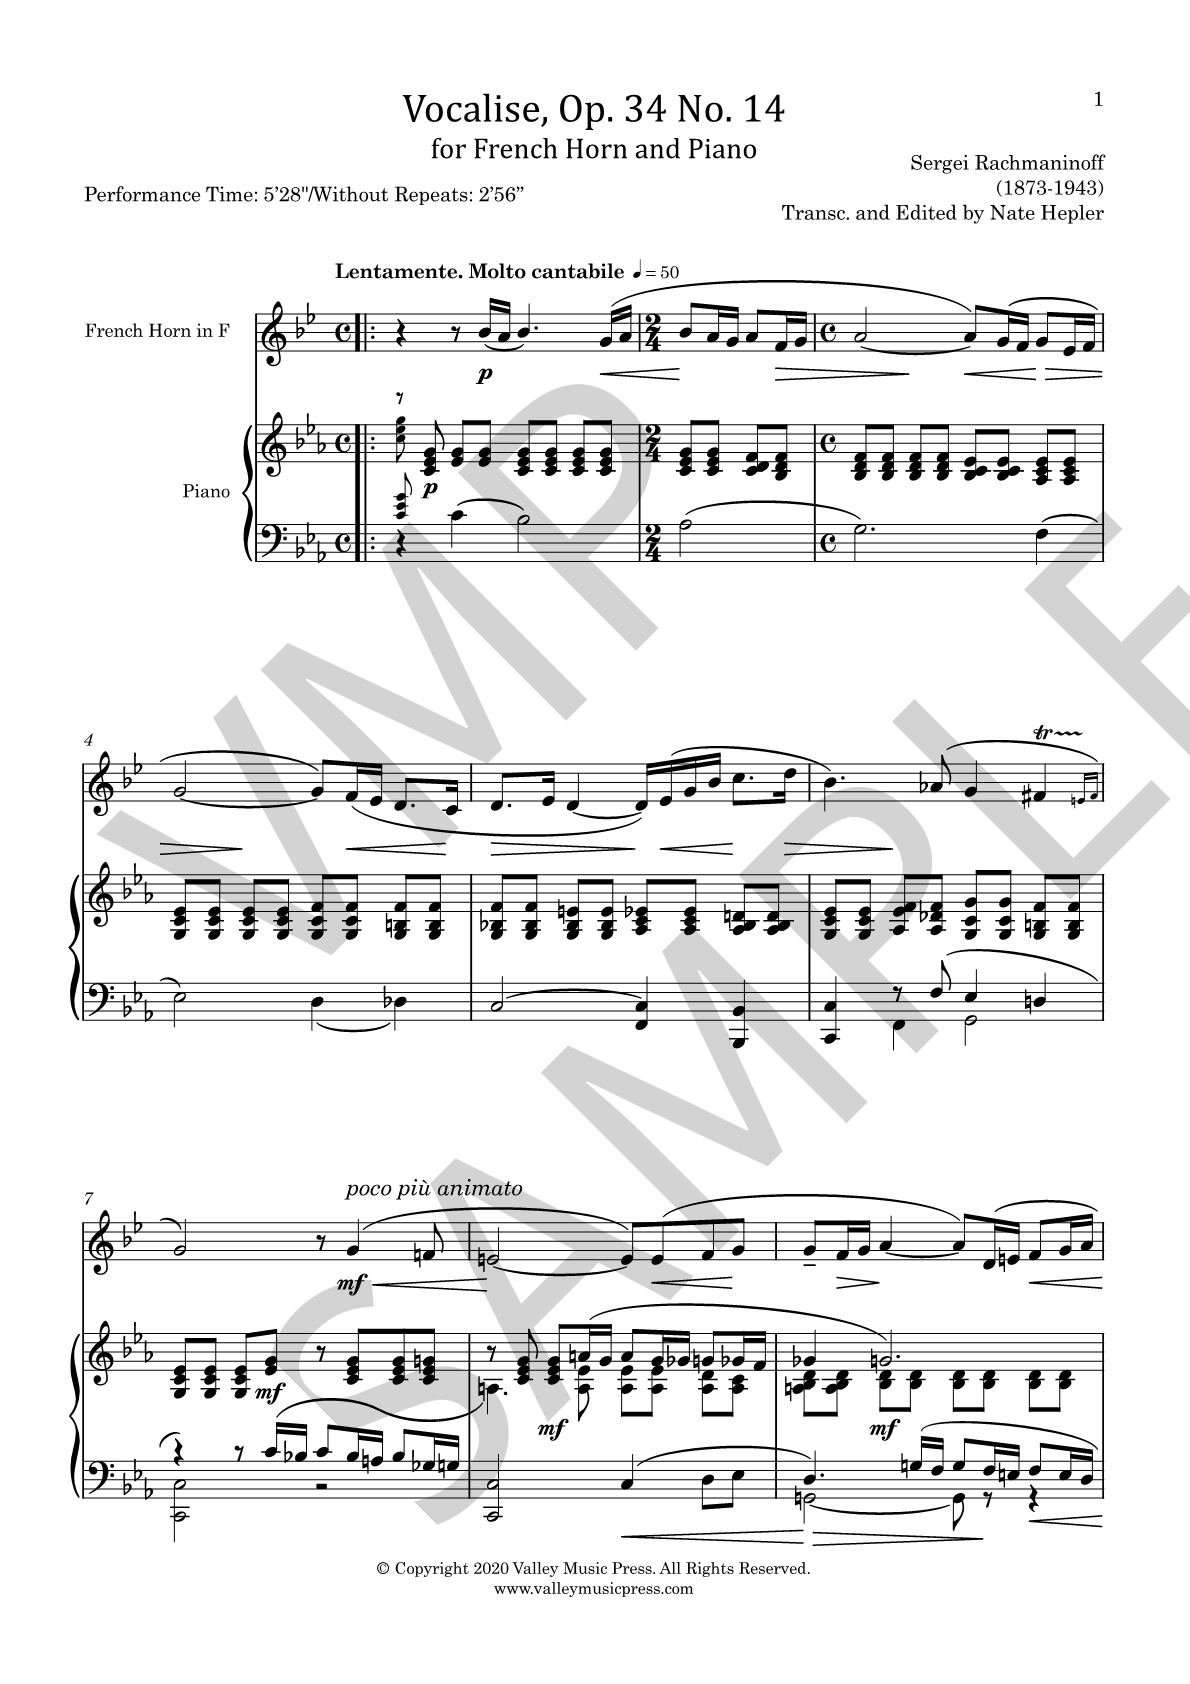 Rachmaninoff - Vocalise Op. 34 No. 14 (Hrn & Piano) - Click Image to Close